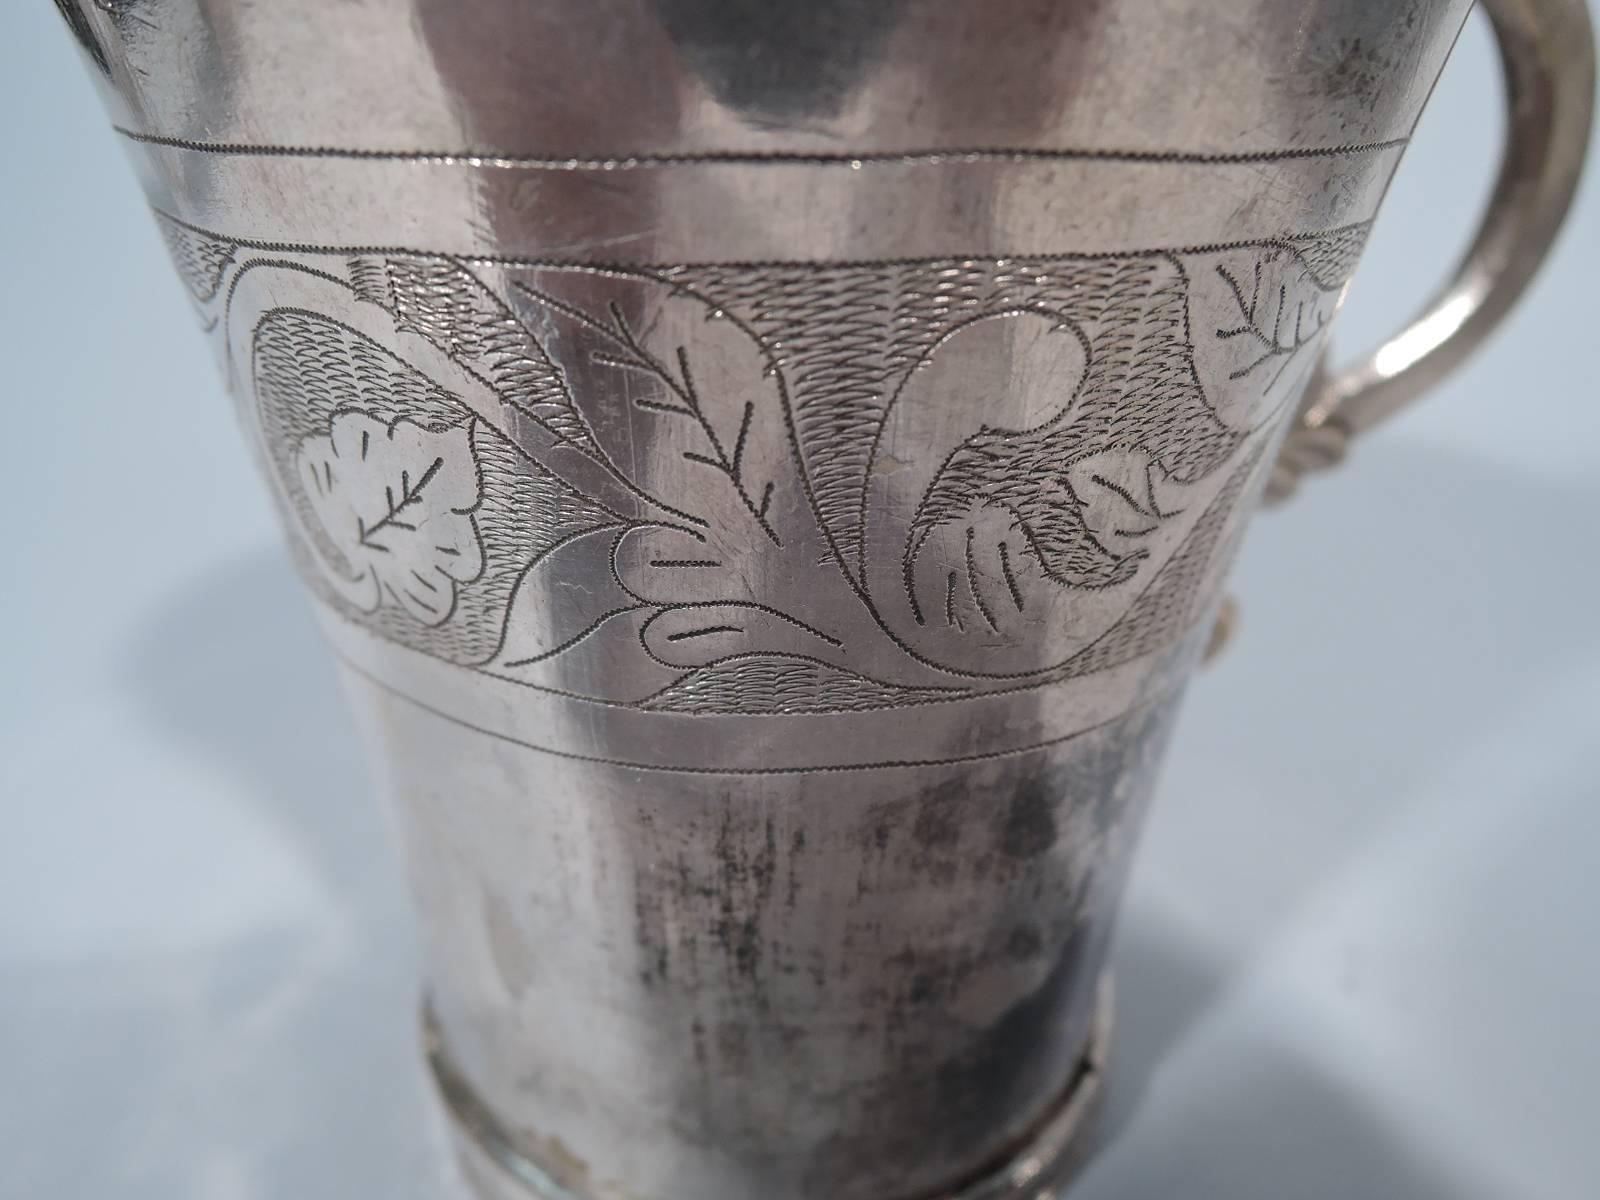 19th Century Antique South American Silver Mug with Scrolls and Leaves